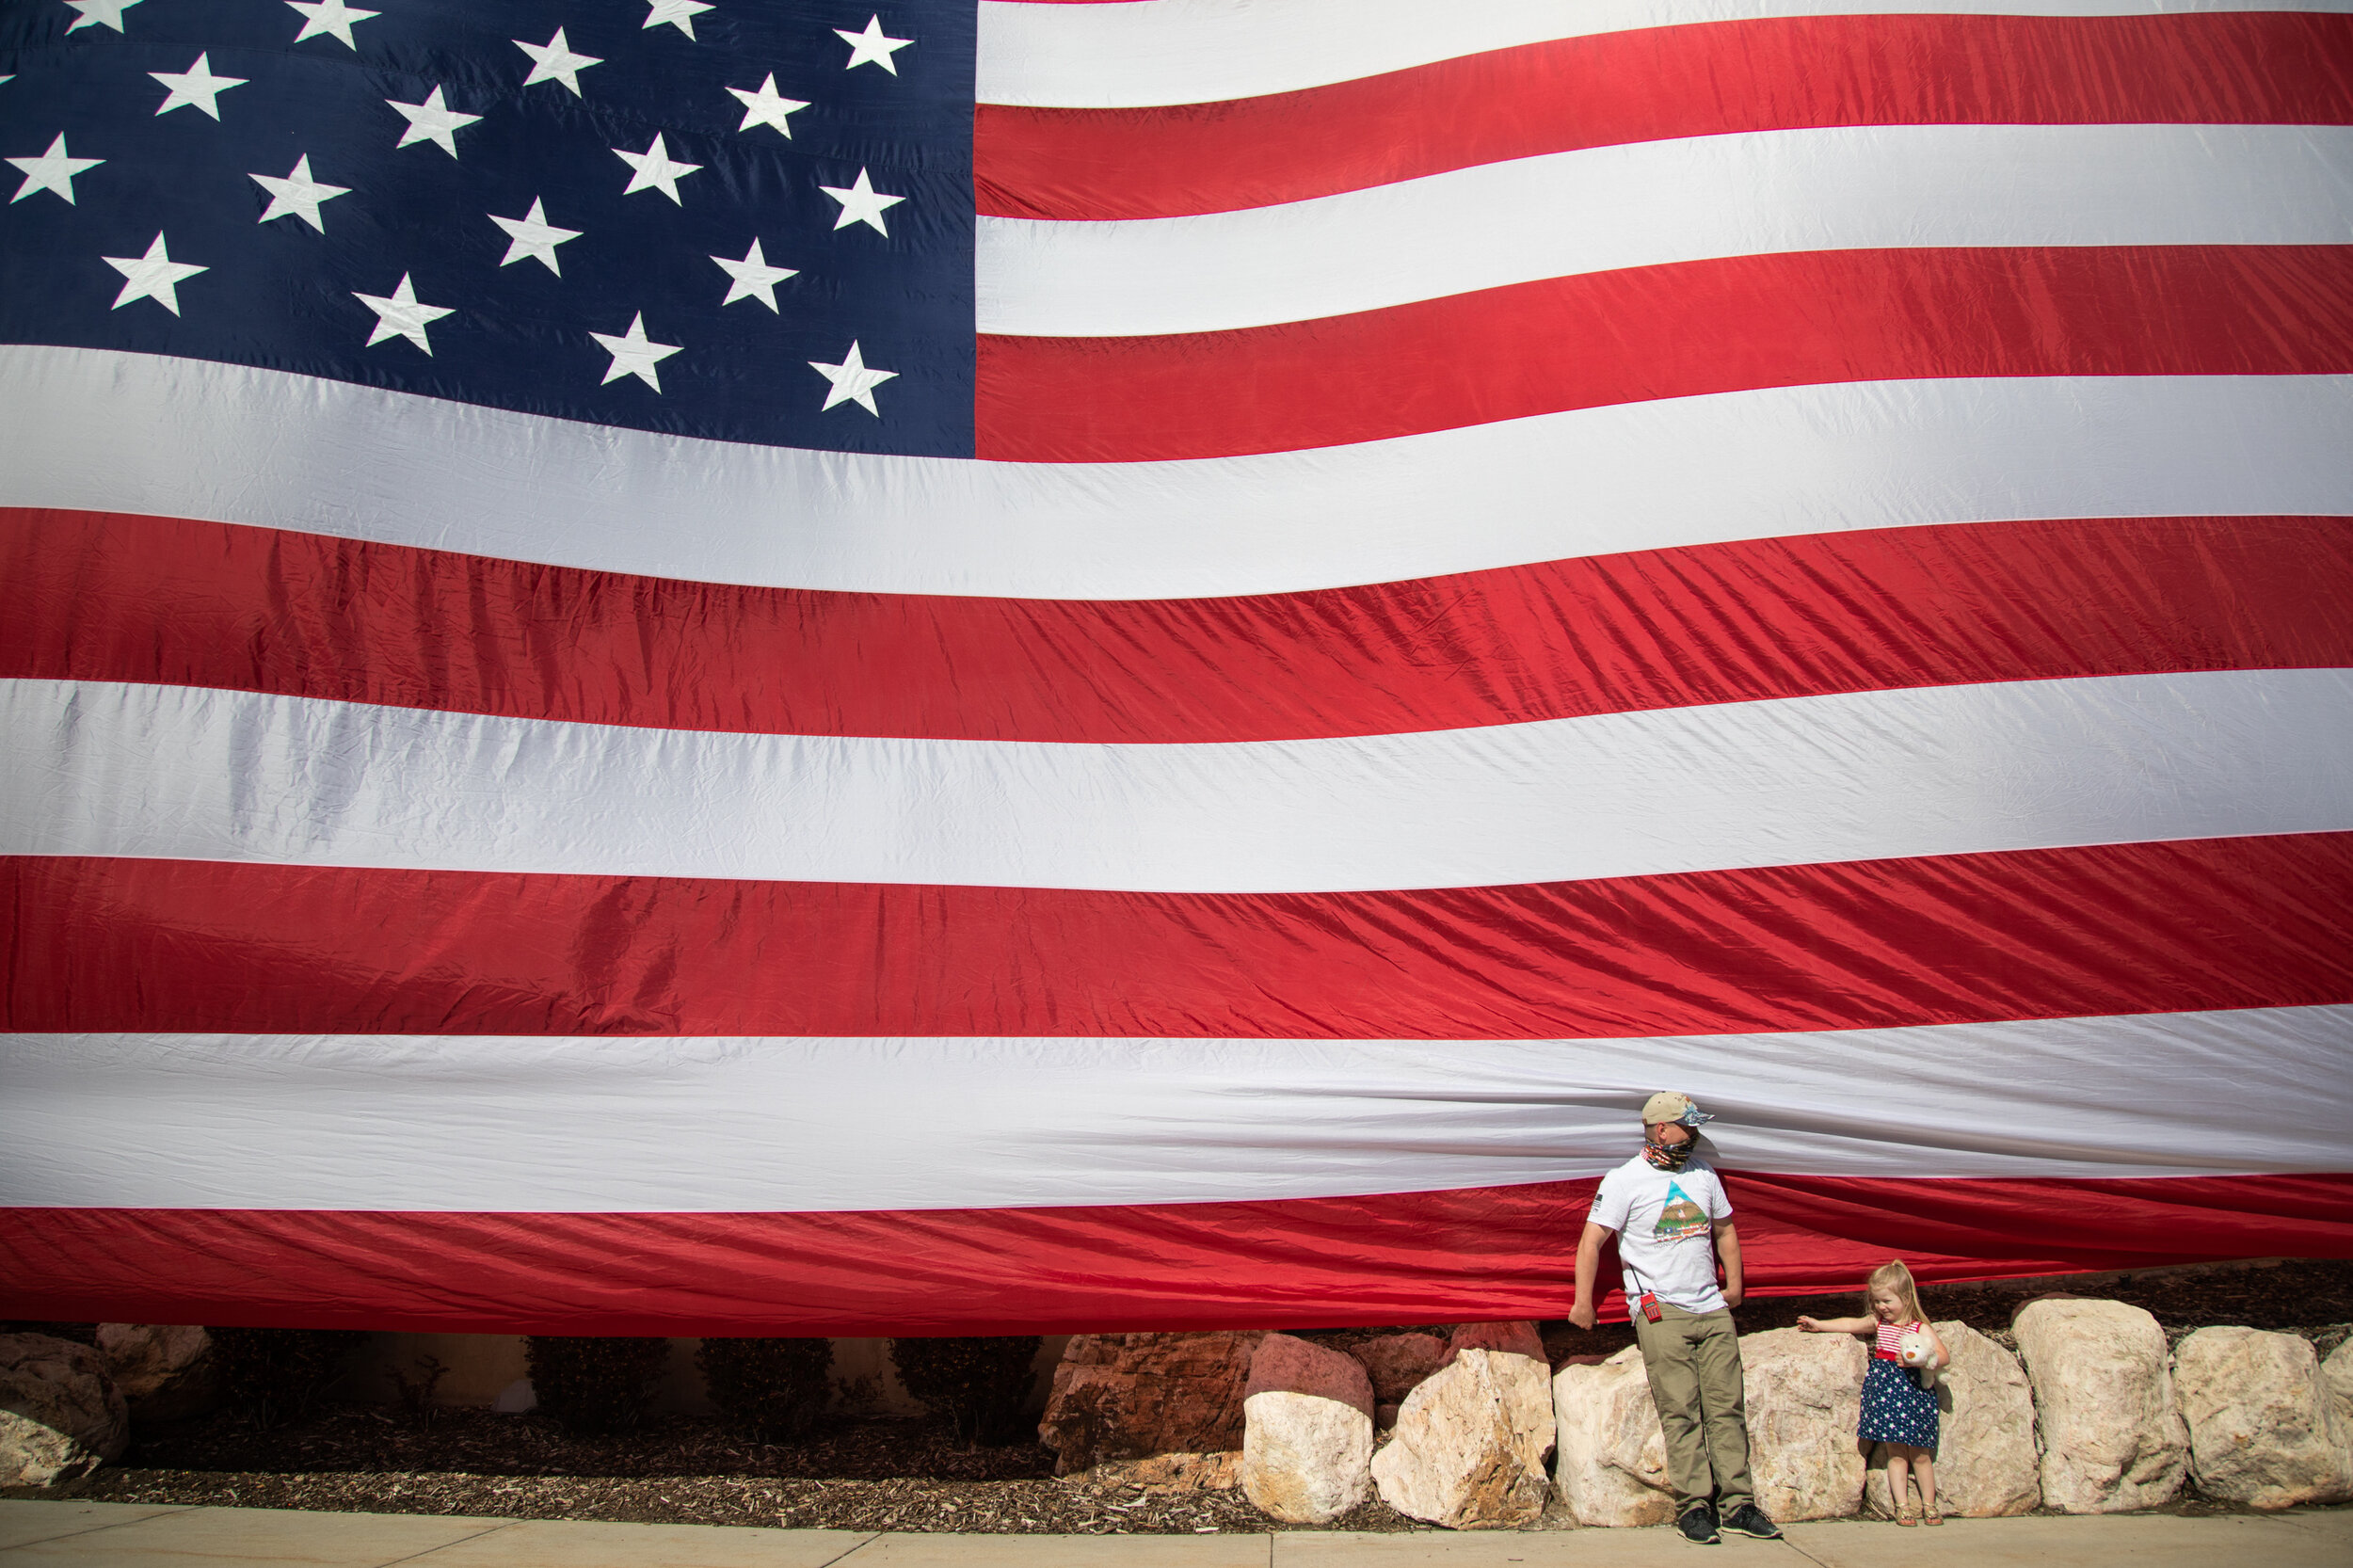  Mark Miller and his daughter Emmalee Miller, 3, stand at the bottom of "The Lieutenant,"  a large American Flag that was unfurled to honor healthcare workers on the frontline dealing with the coronavirus pandemic on Tuesday, April 28, 2020, outside 